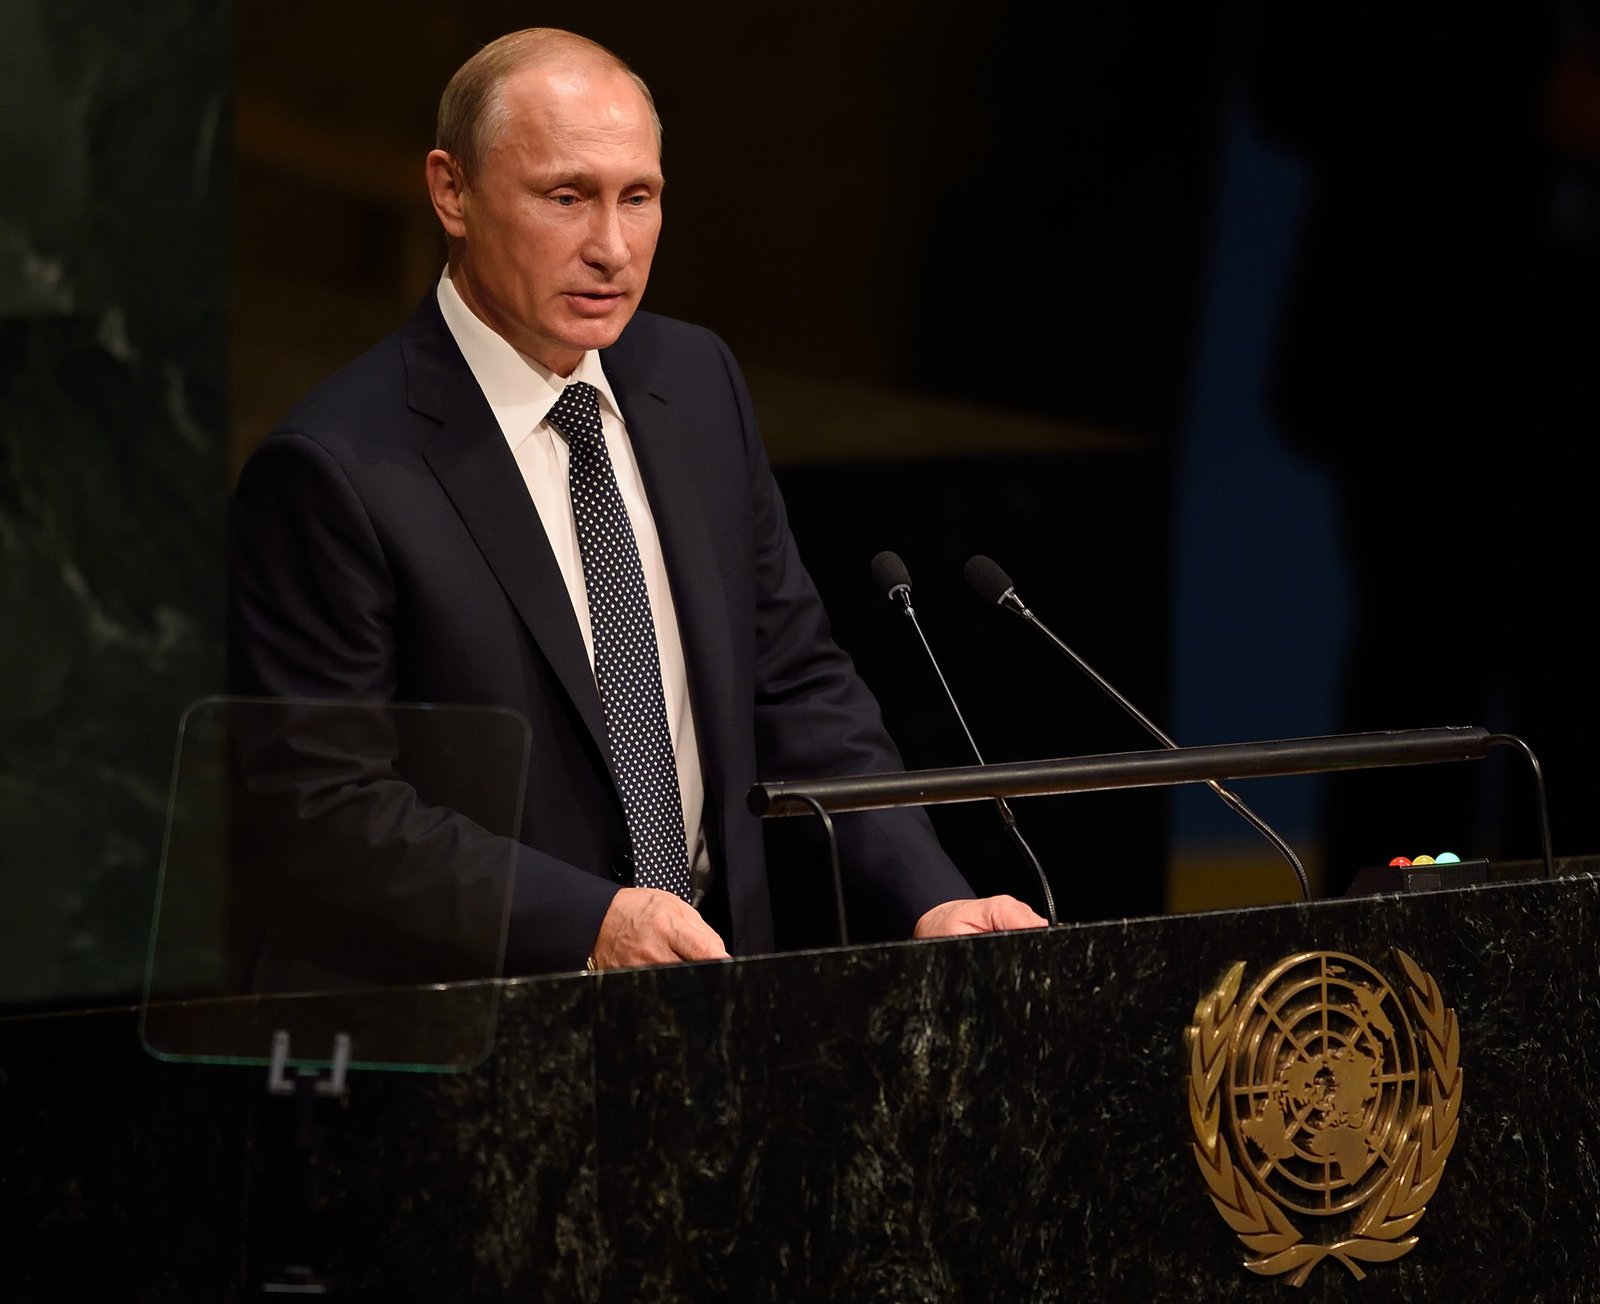 Putin S Un Speech Means Russia Is Back In The Game The Lithuania Tribune